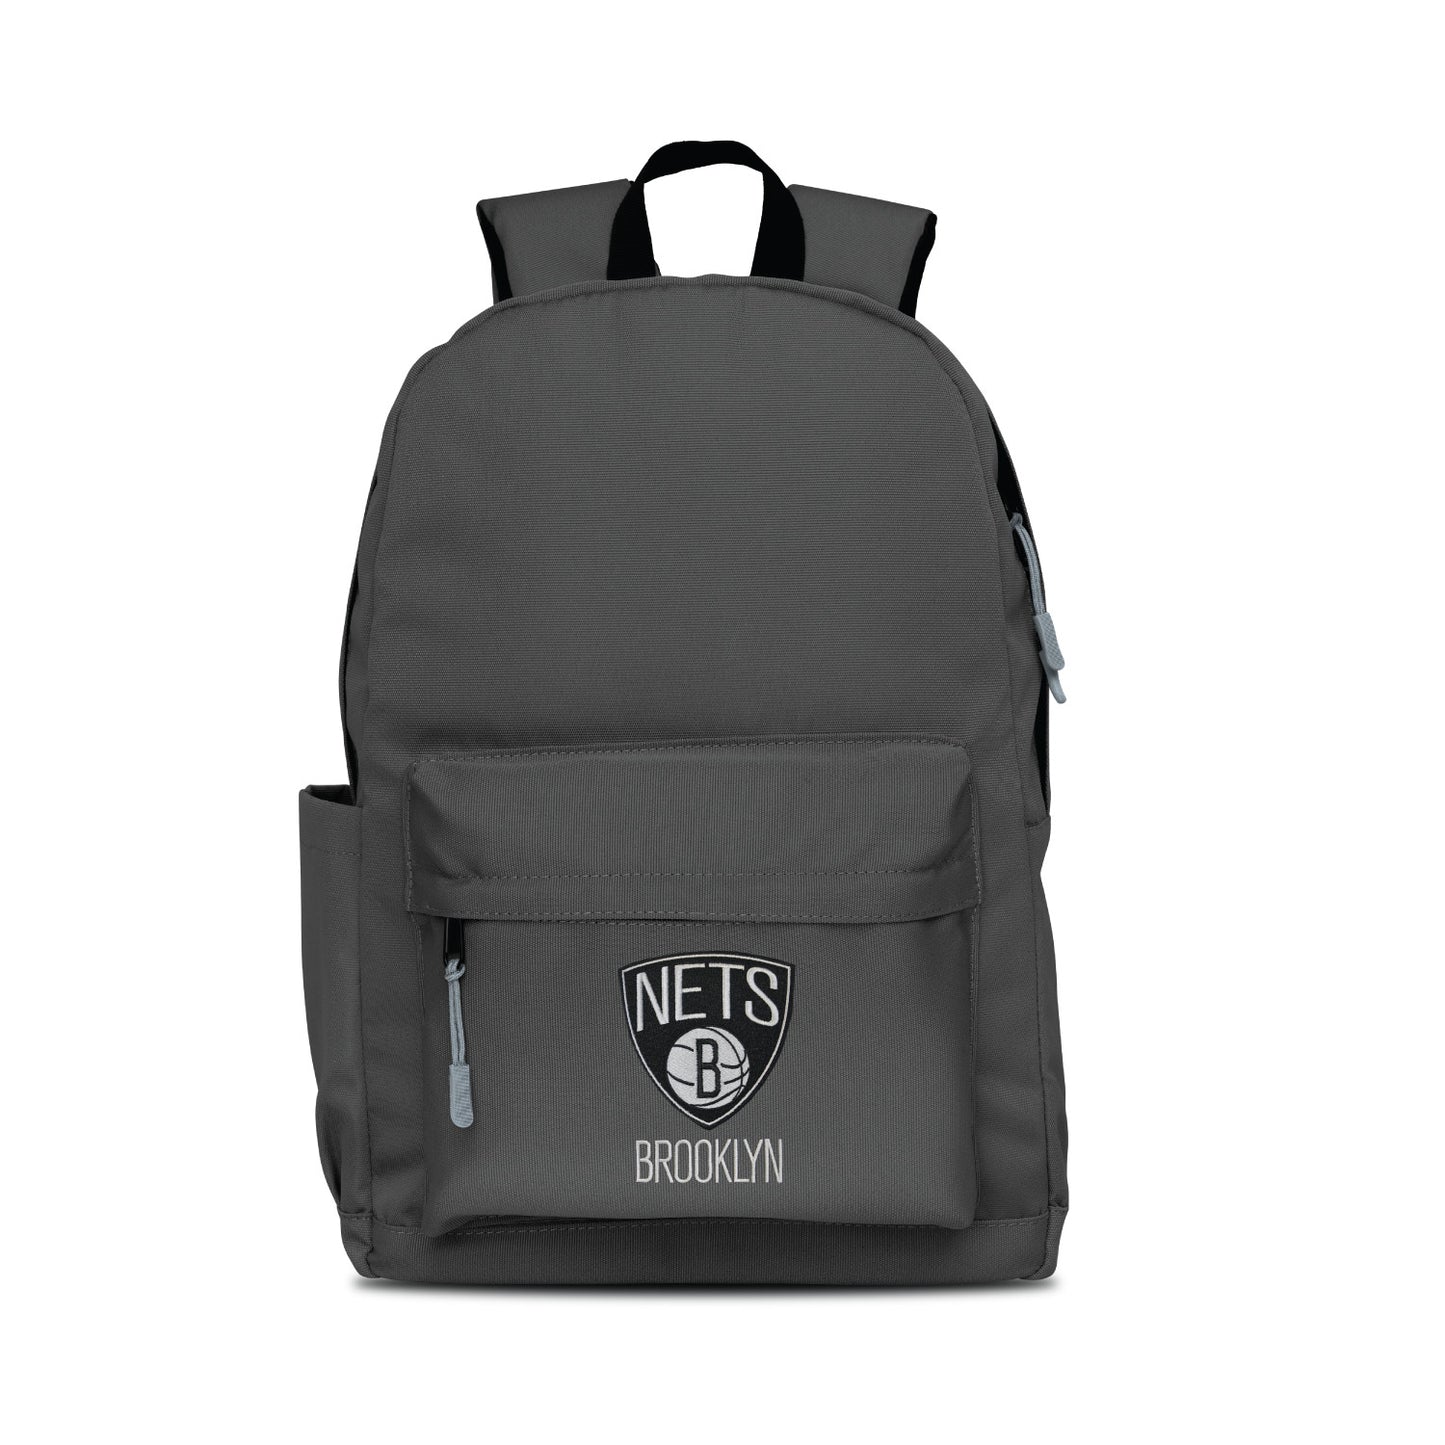 Brooklyn Nets Campus Laptop Backpack - Gray